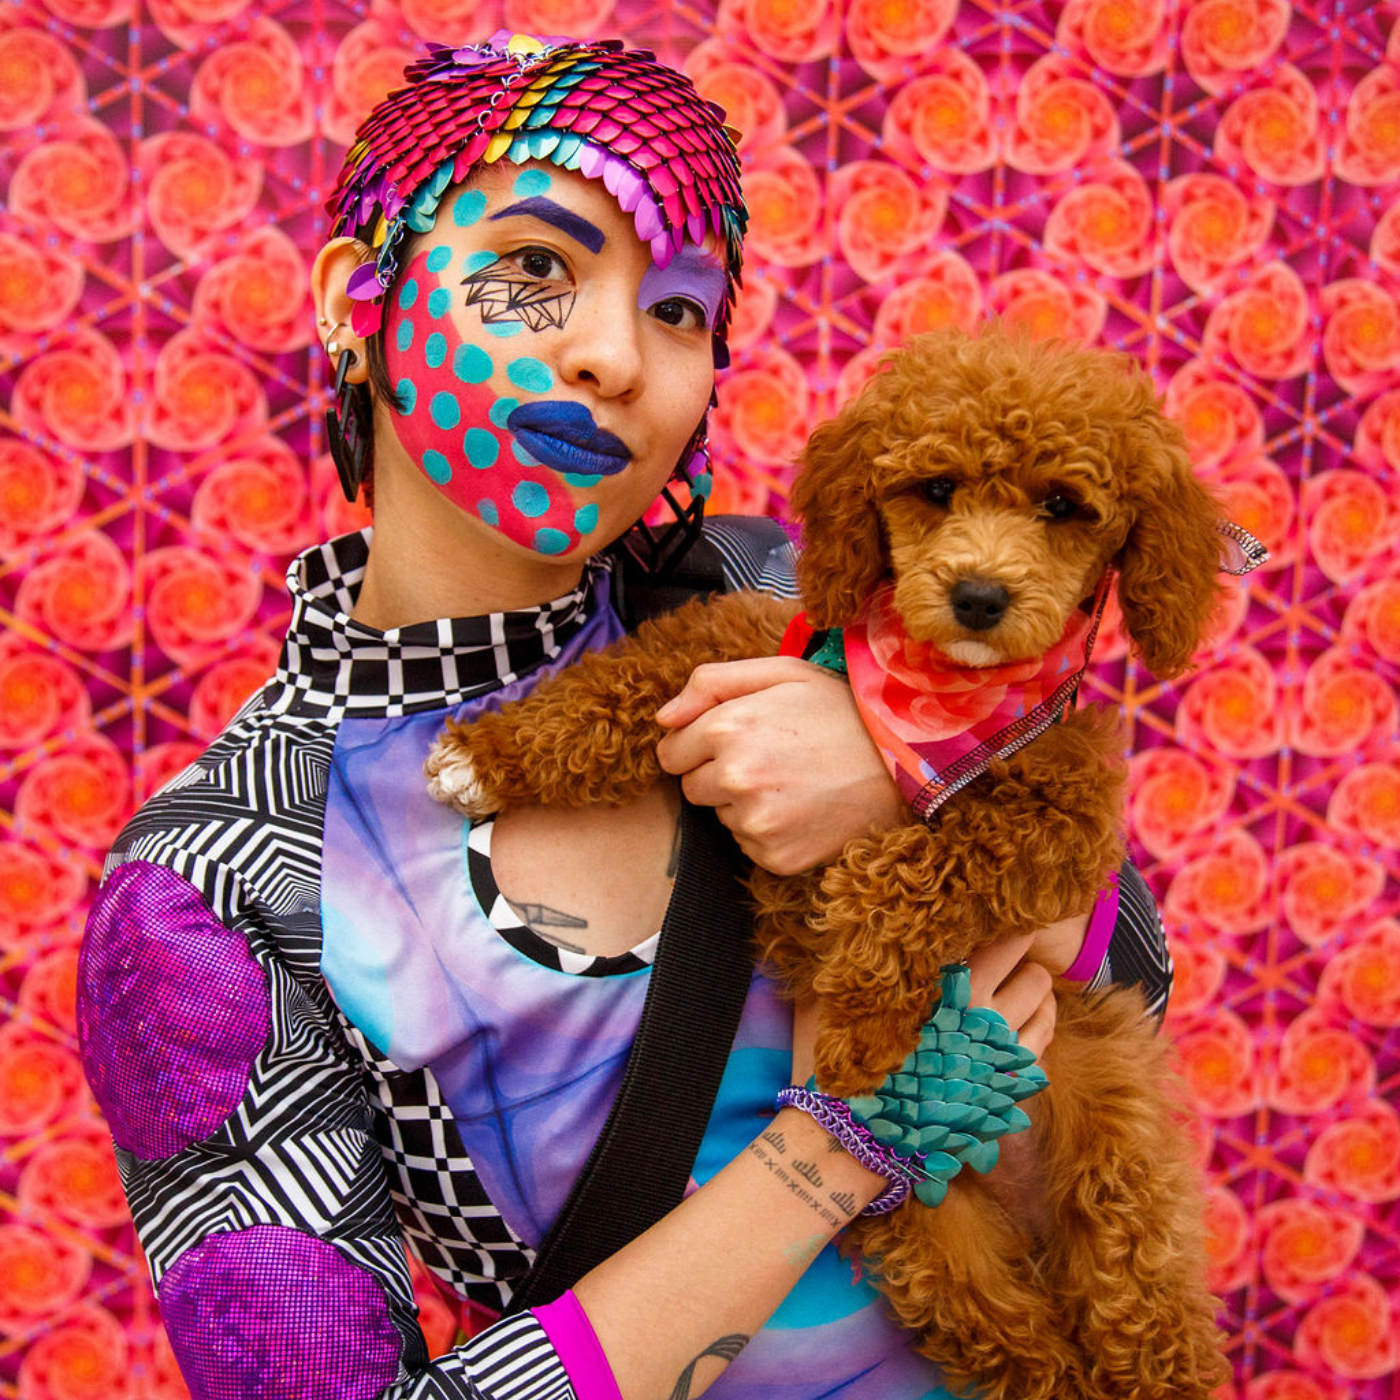 Sky Cubacub stands looking at the camera in front of a bright orange and magenta wall with swirls, holding their dog, D.O.G., who is wearing a red bandana.